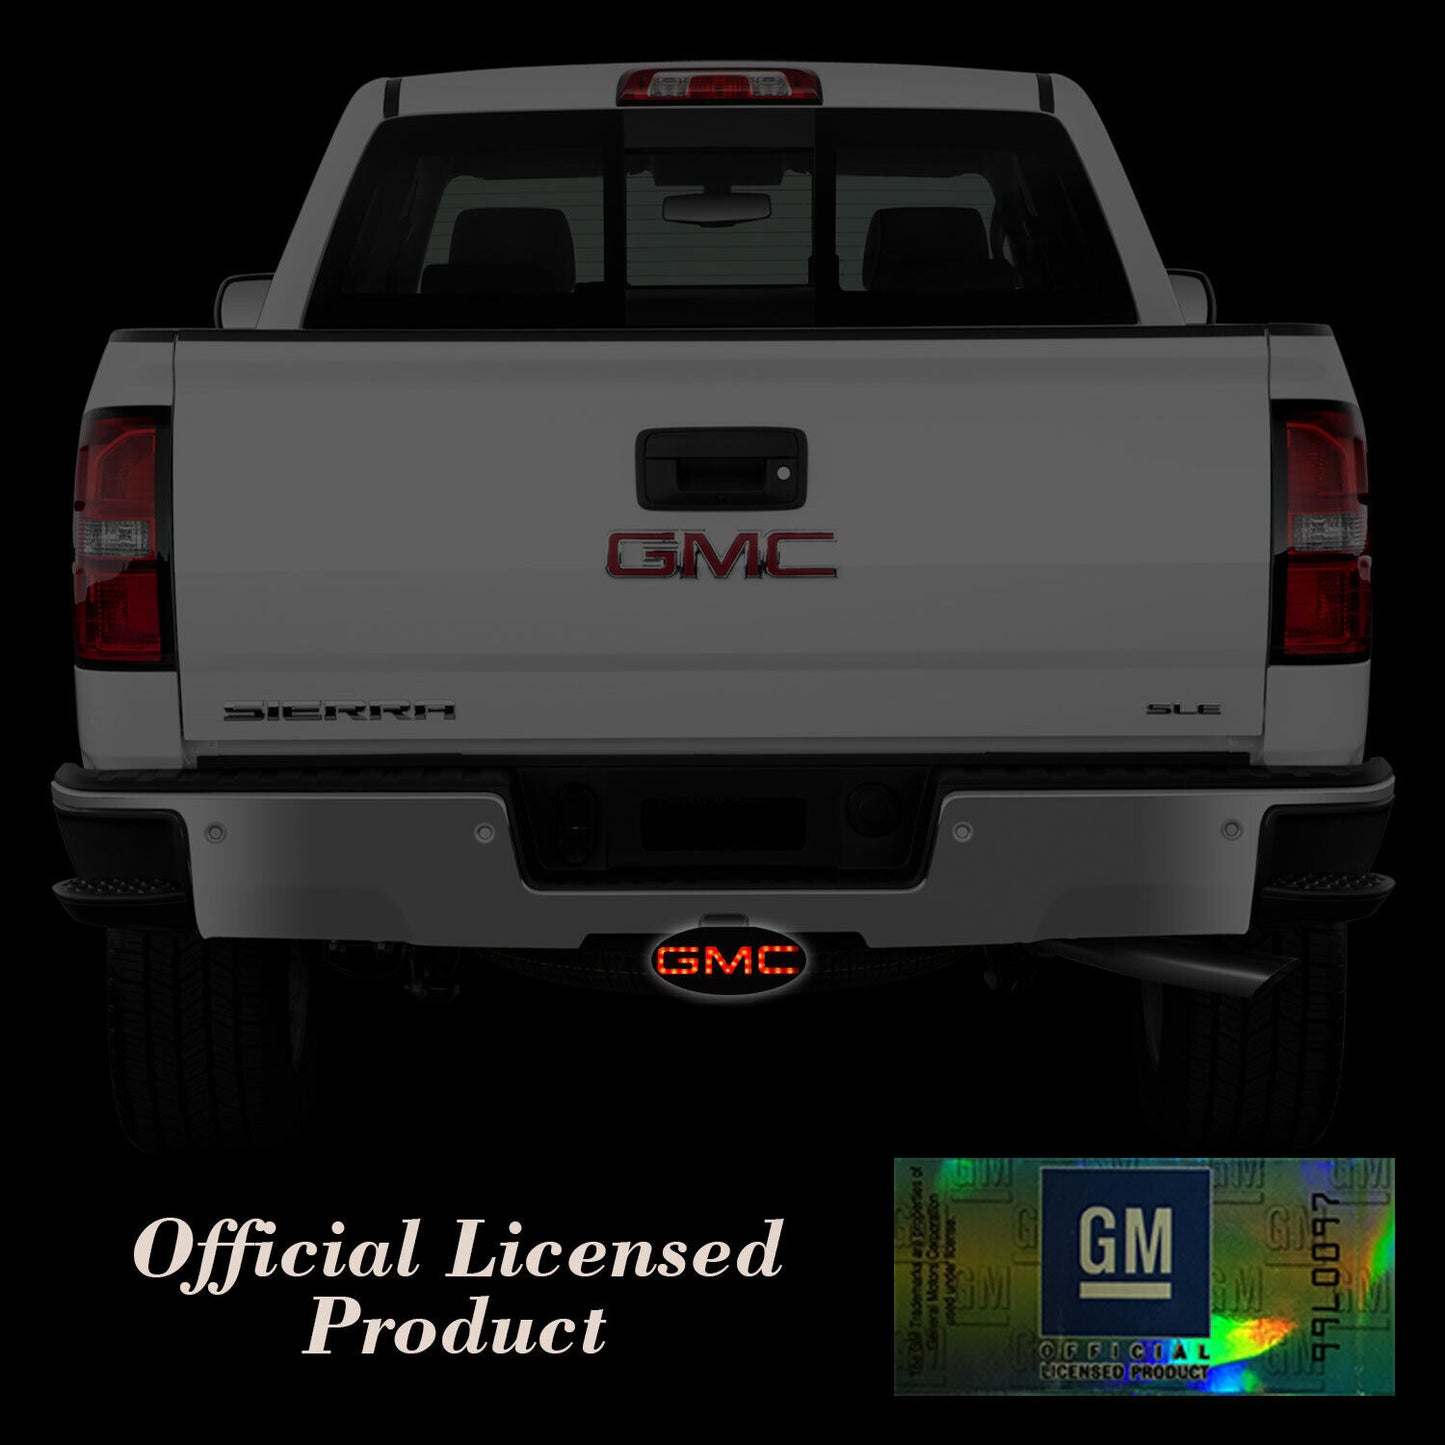 GMC Hitch Cover Licensed LED Light Trailer Towing Hitch Cover Receiver Chorm6061